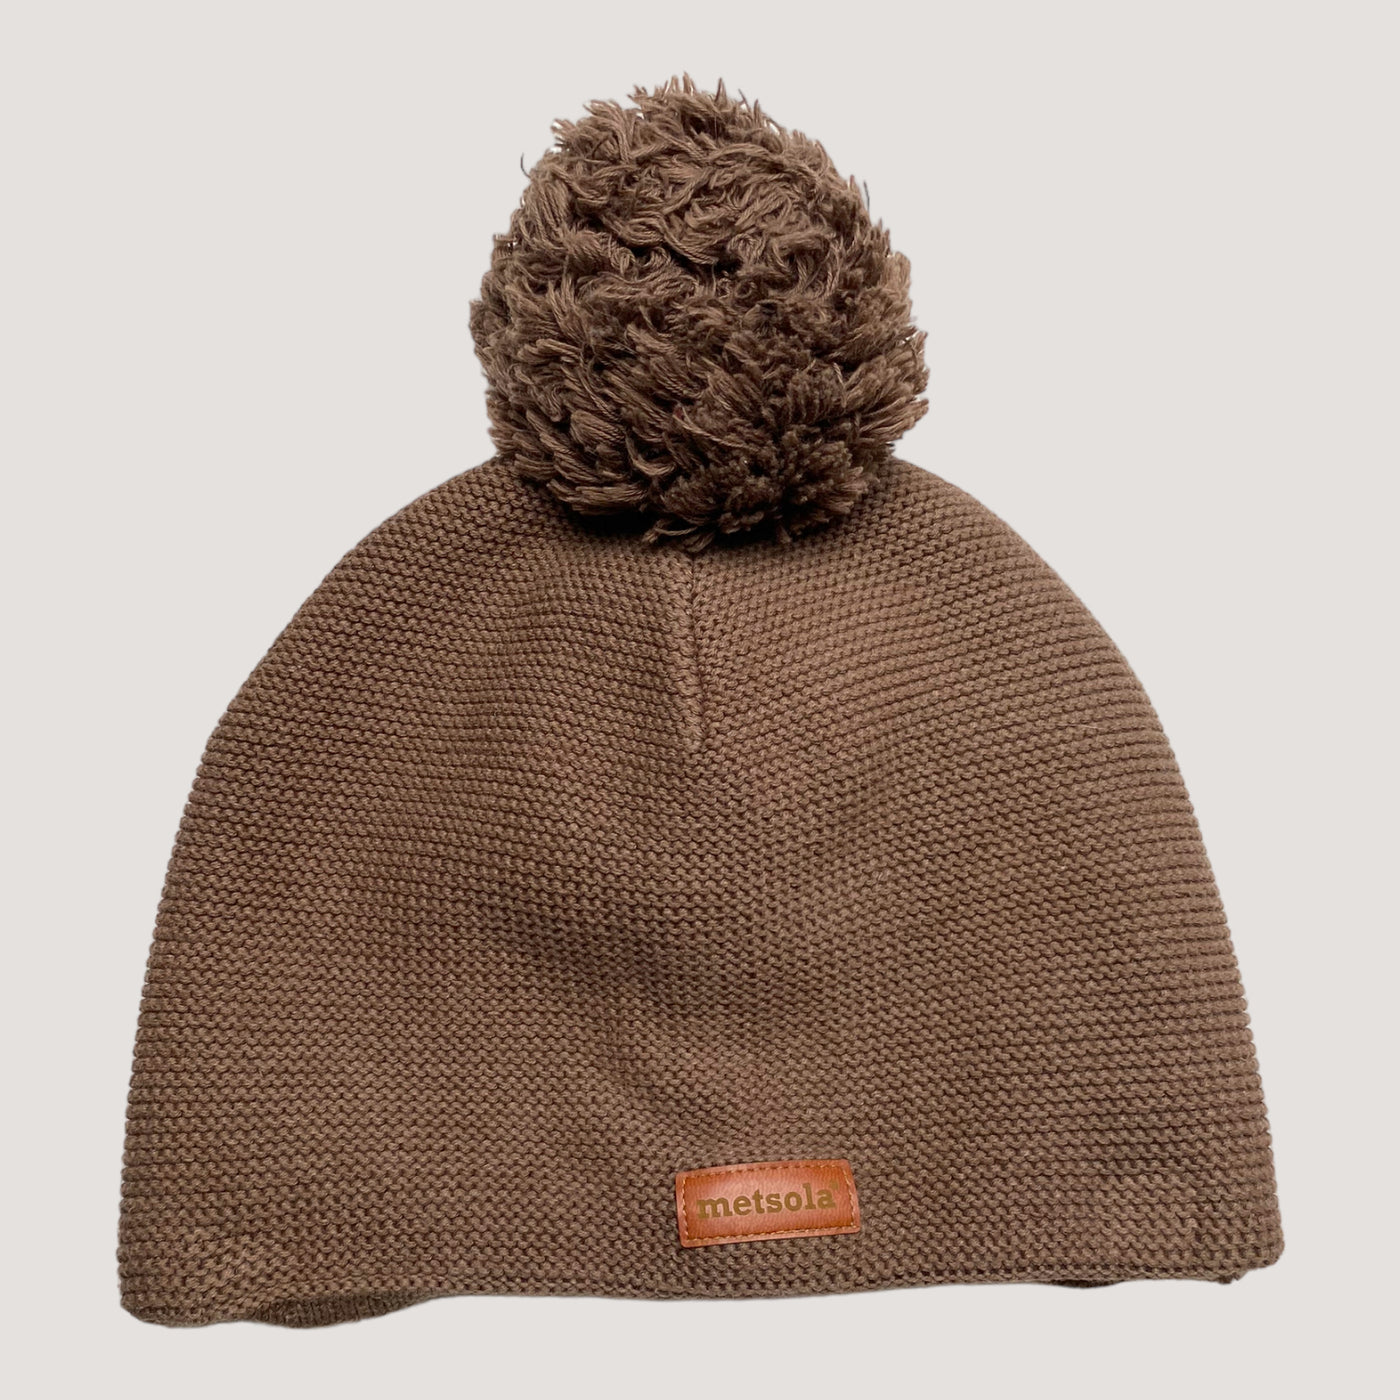 Metsola cotton beanie with pom, brown sugar | 7-8y